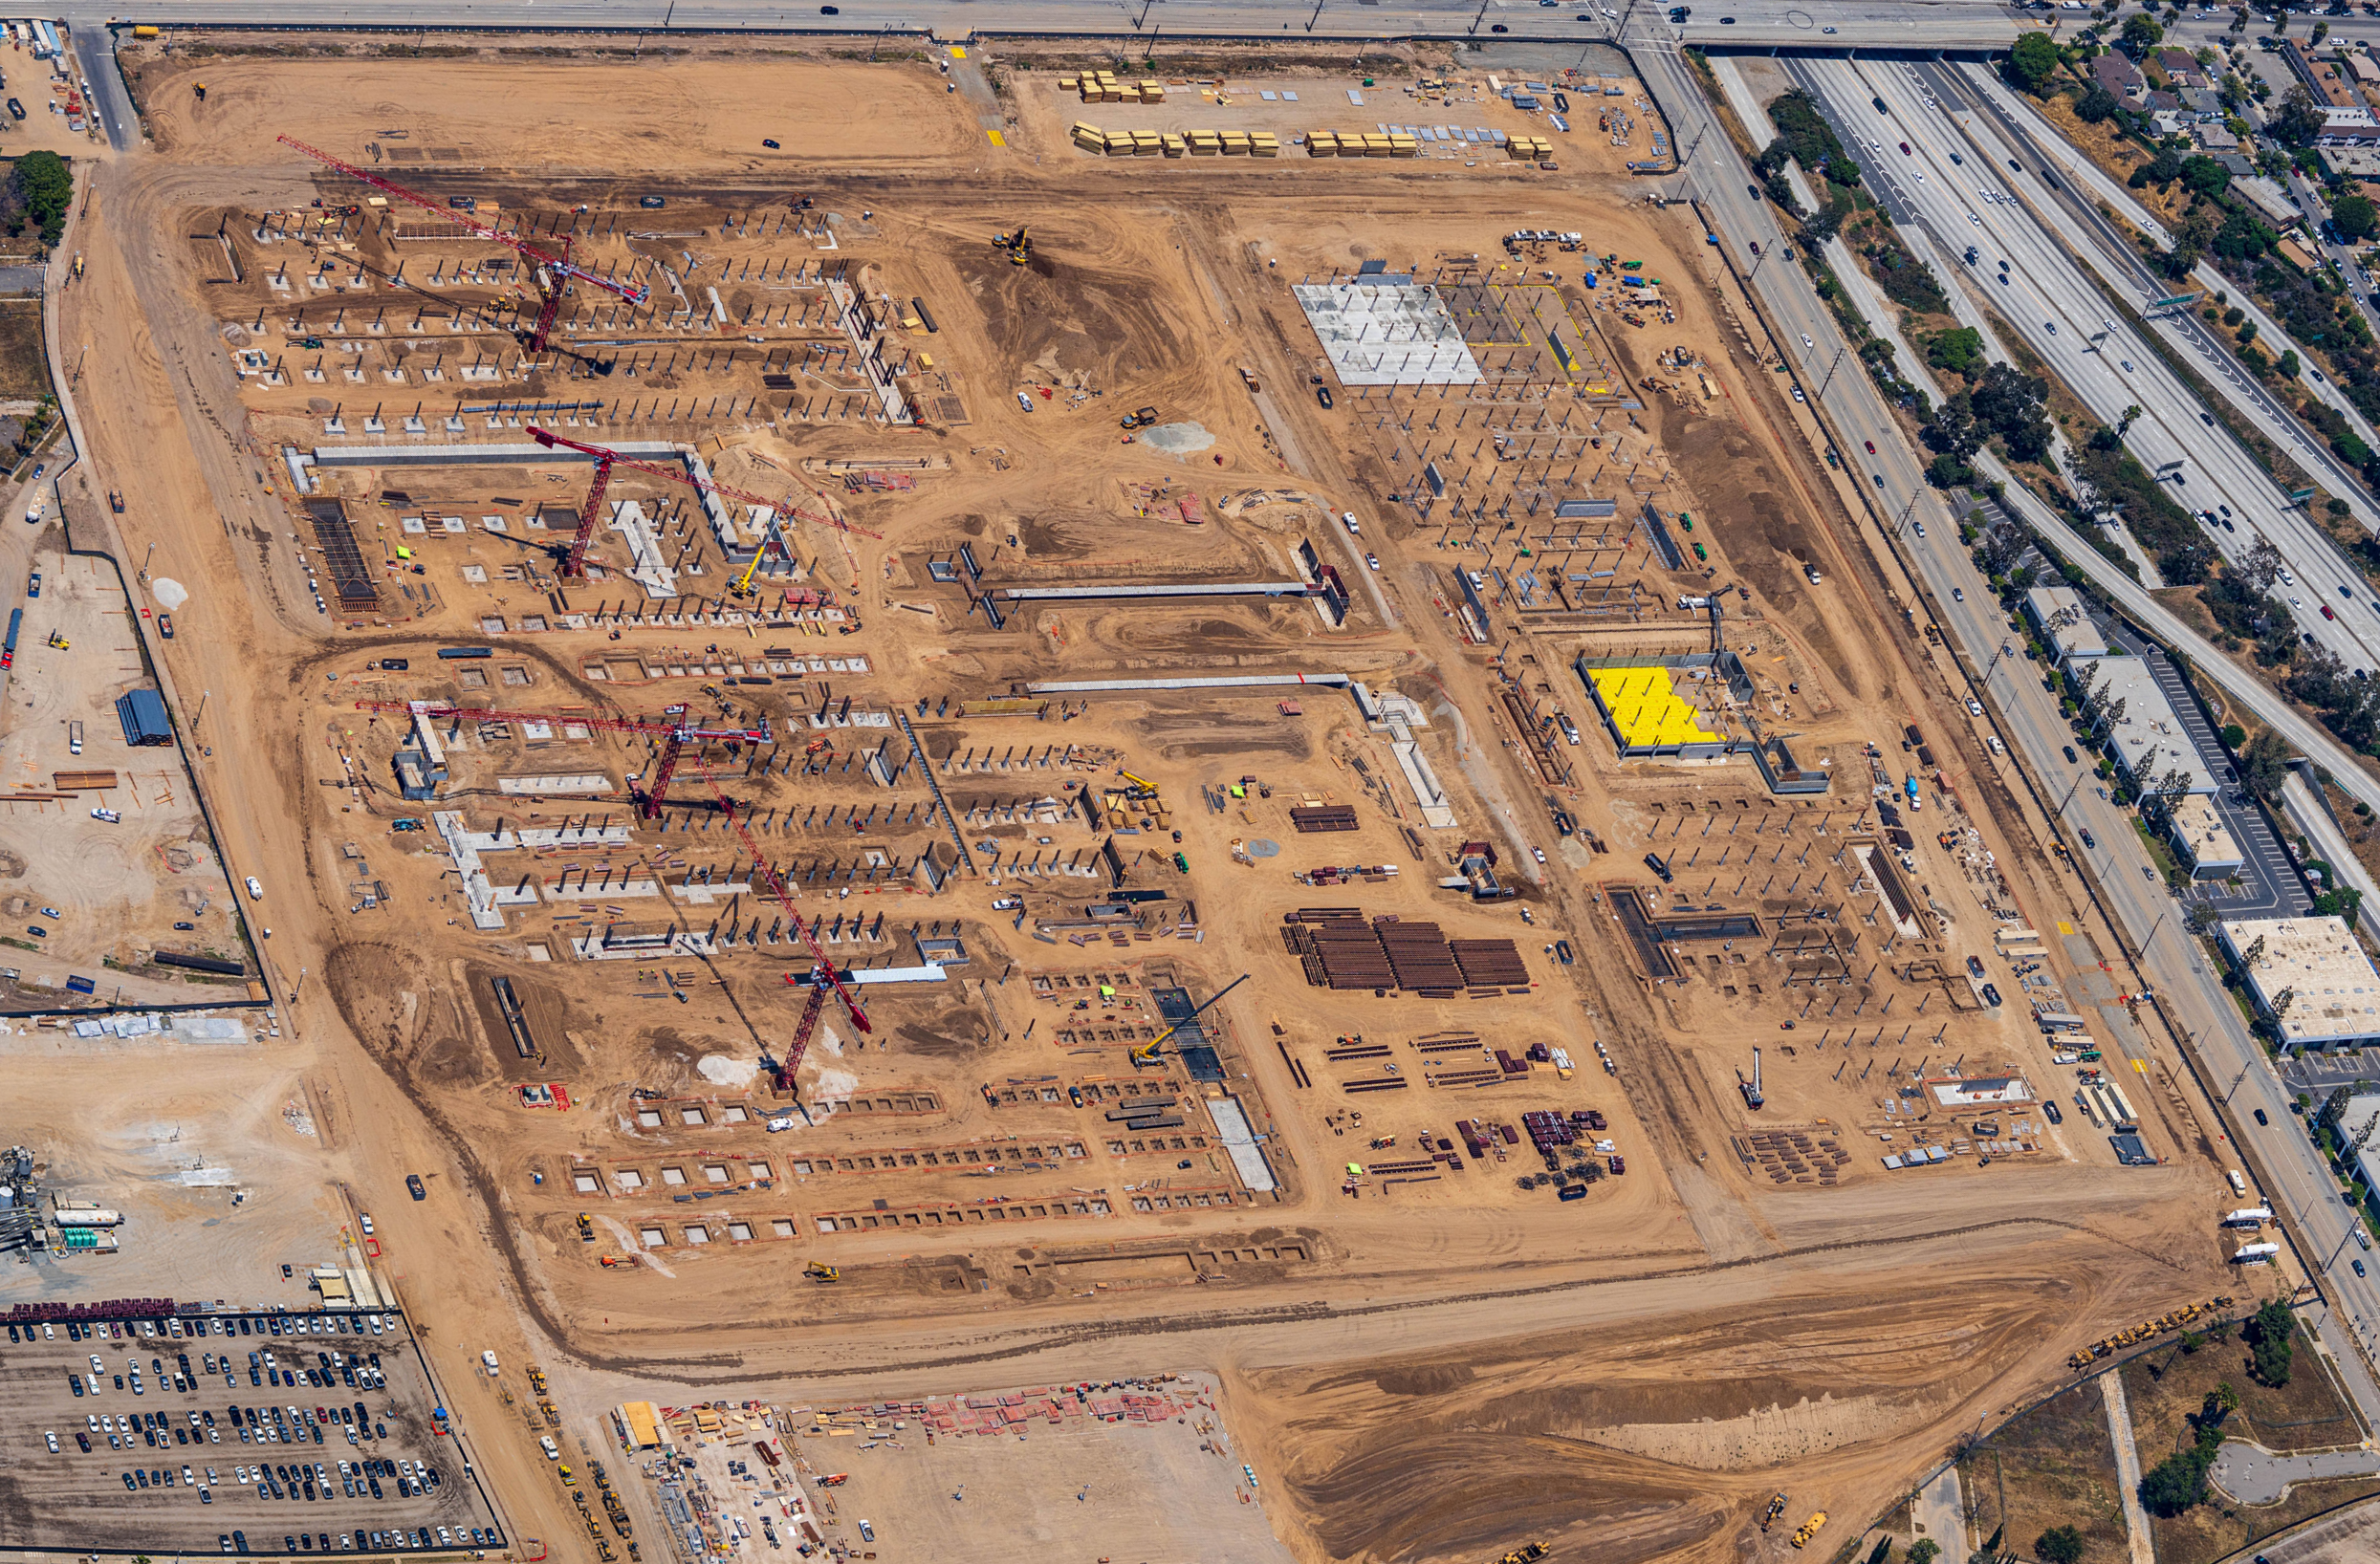 An aerial view of the Consolidated Rent-A-Car facility site.